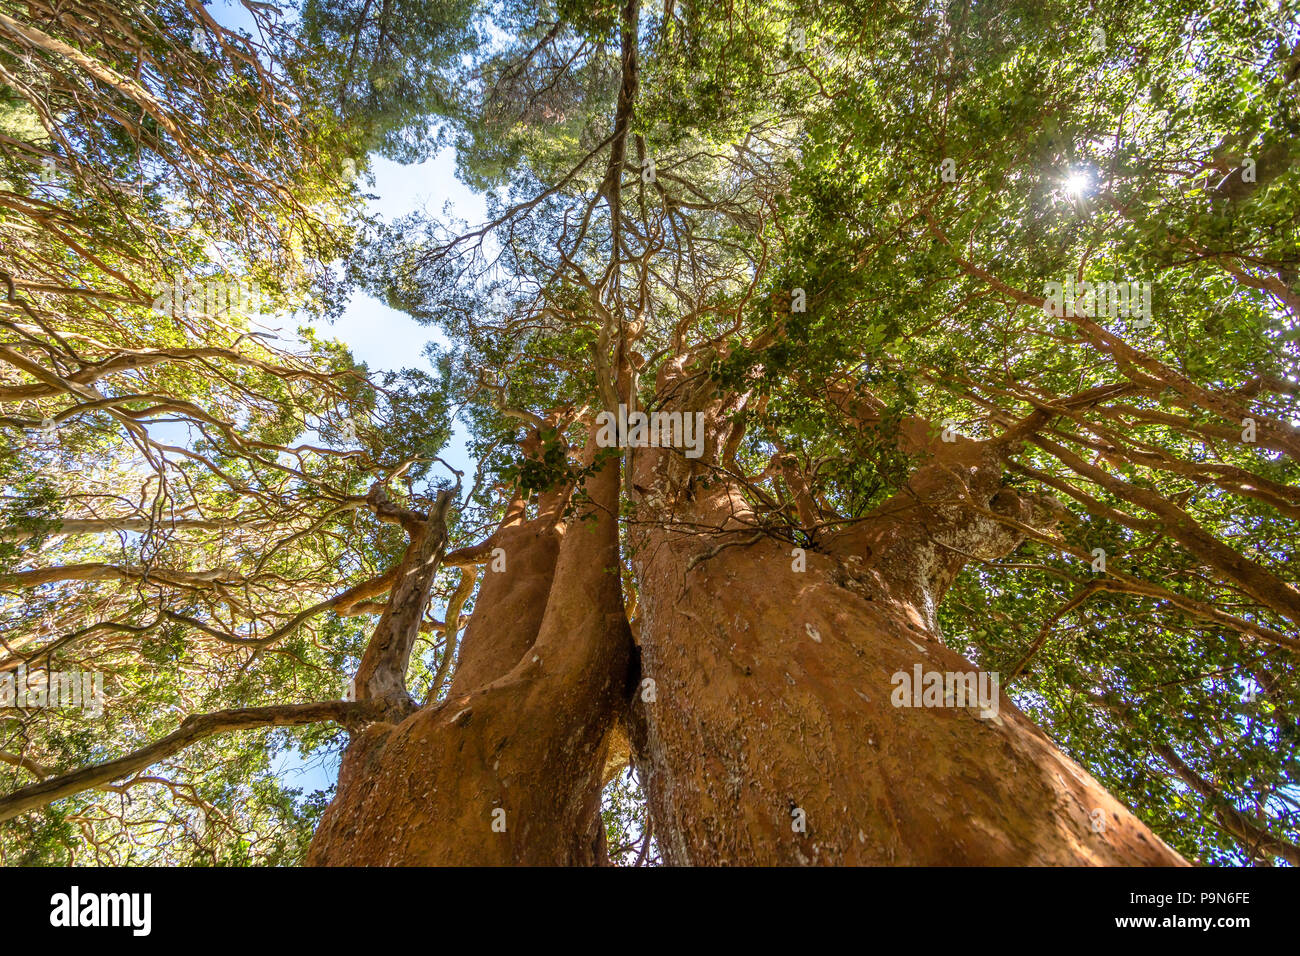 Arrayanes Trees (Chilean Myrtle) with orange trunk at Arrayanes National Park - Villa La Angostura, Patagonia, Argentina Stock Photo